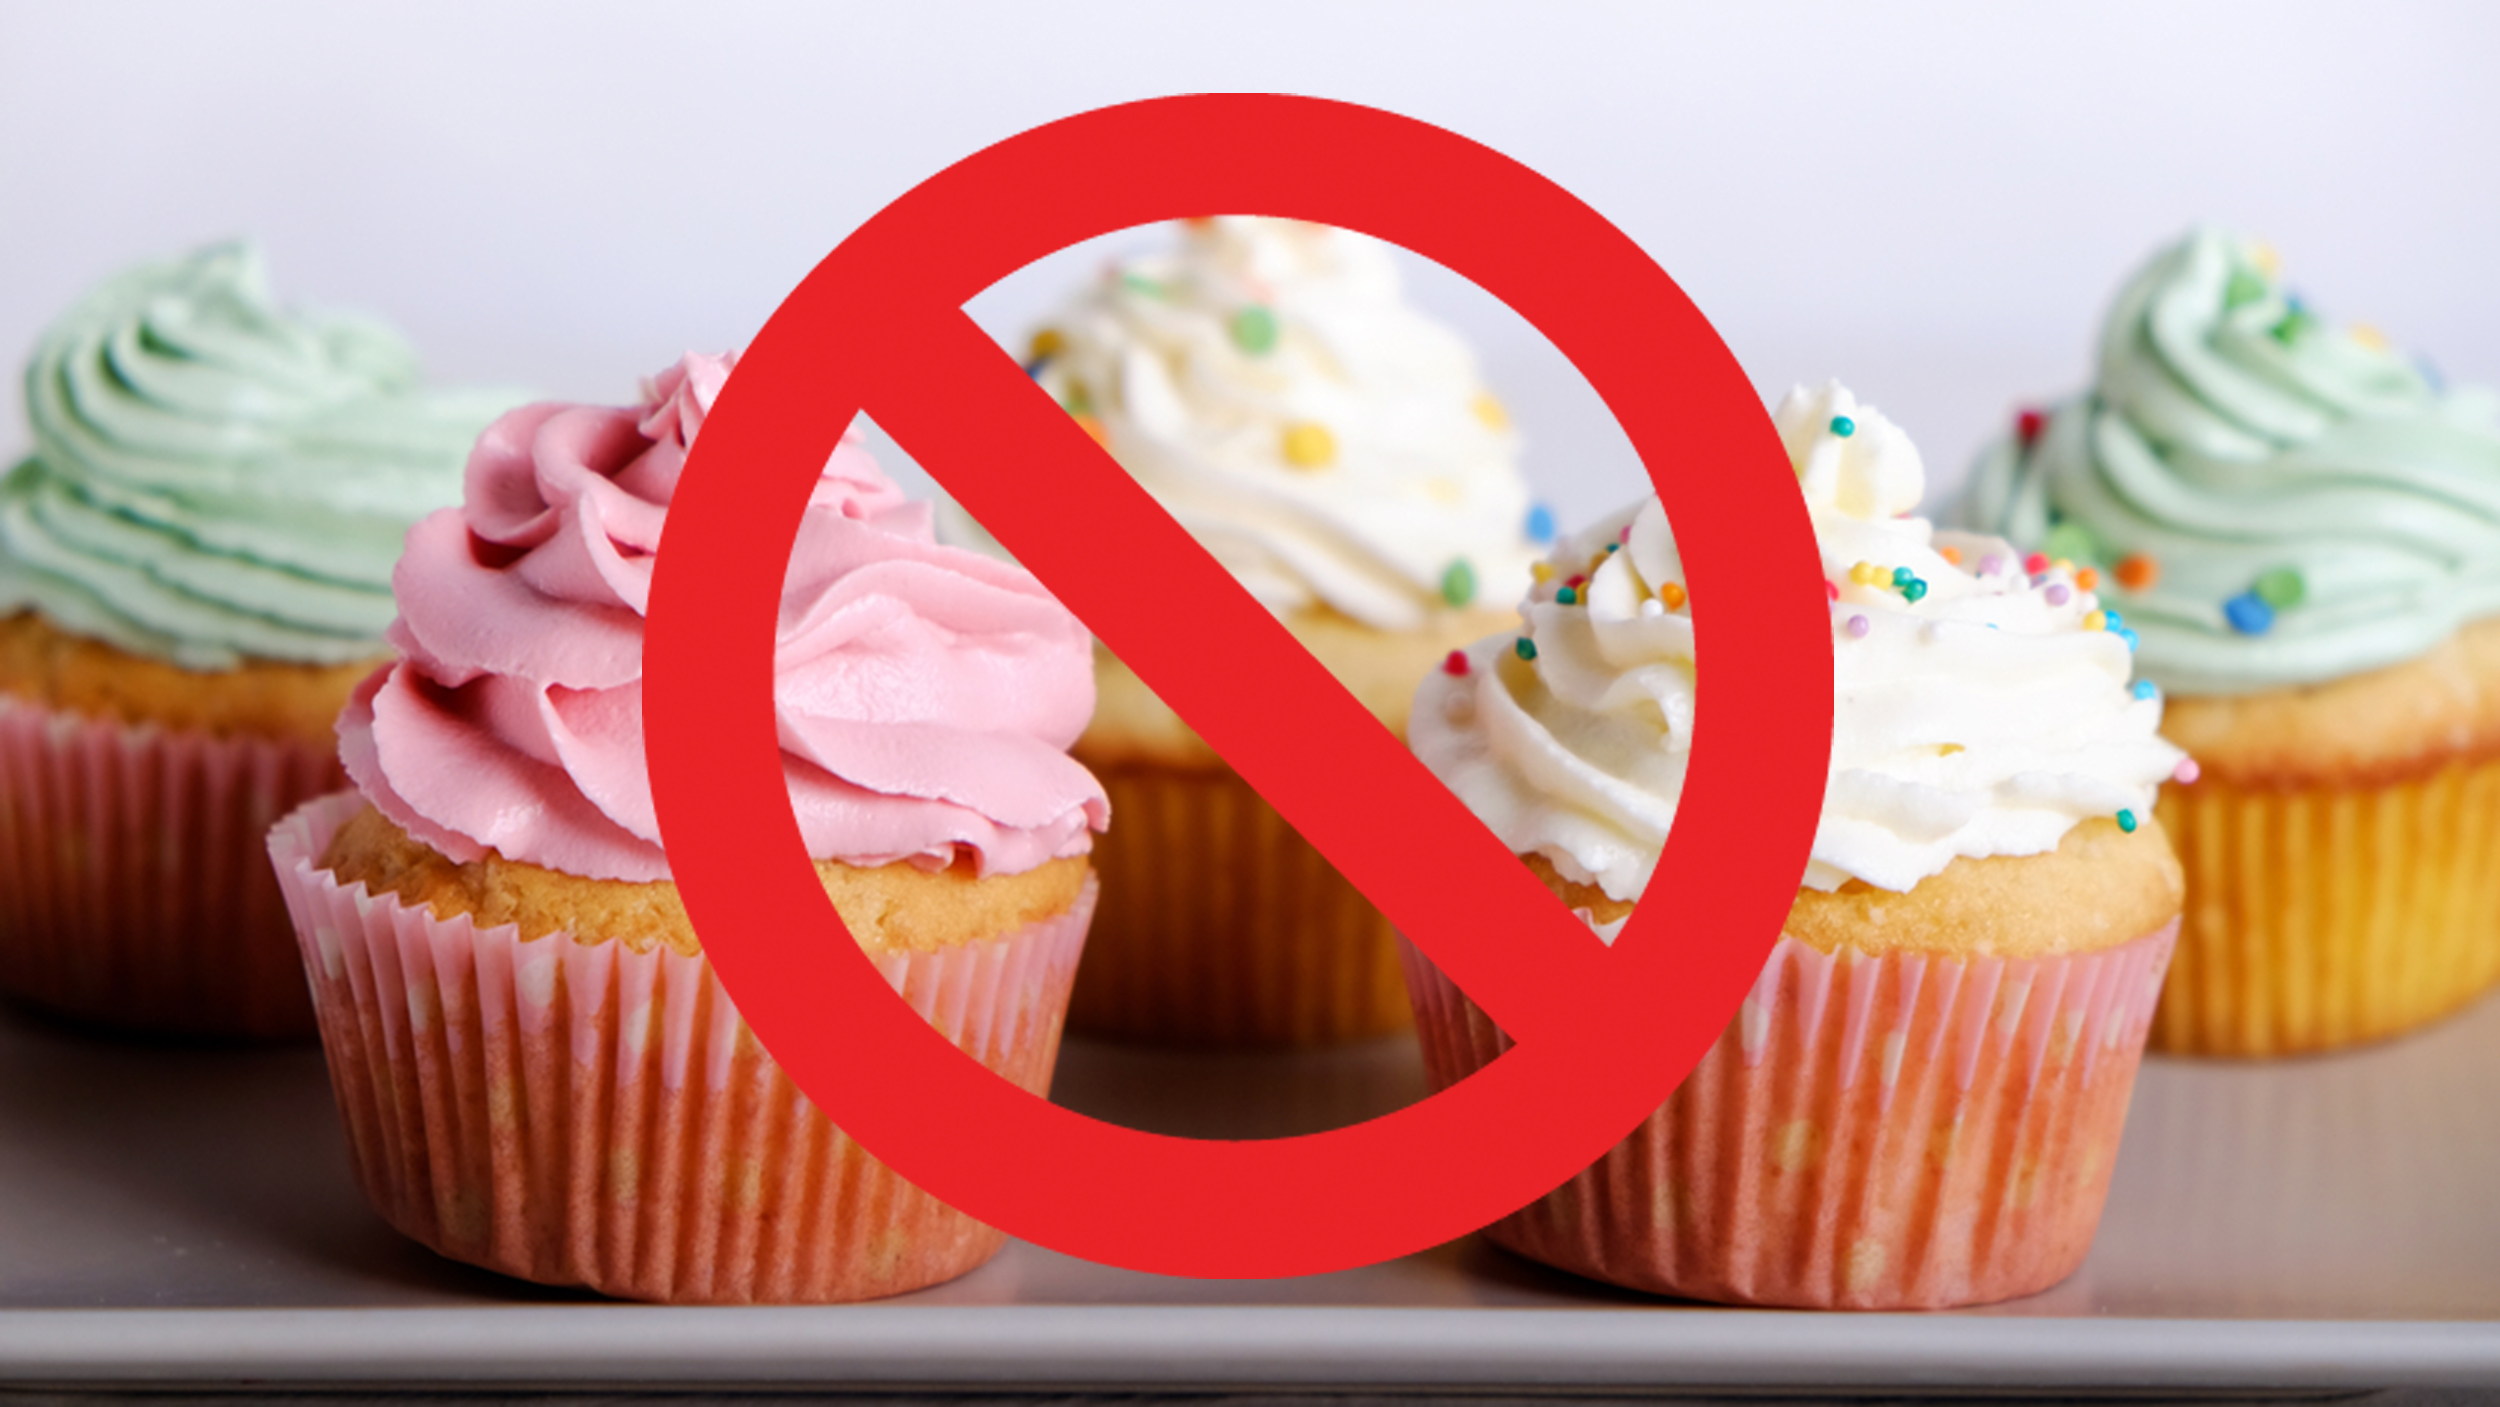 Birthday Cupcakes and Candy Canes Banned from School - And Parents are Mad as Hell - Mumslounge